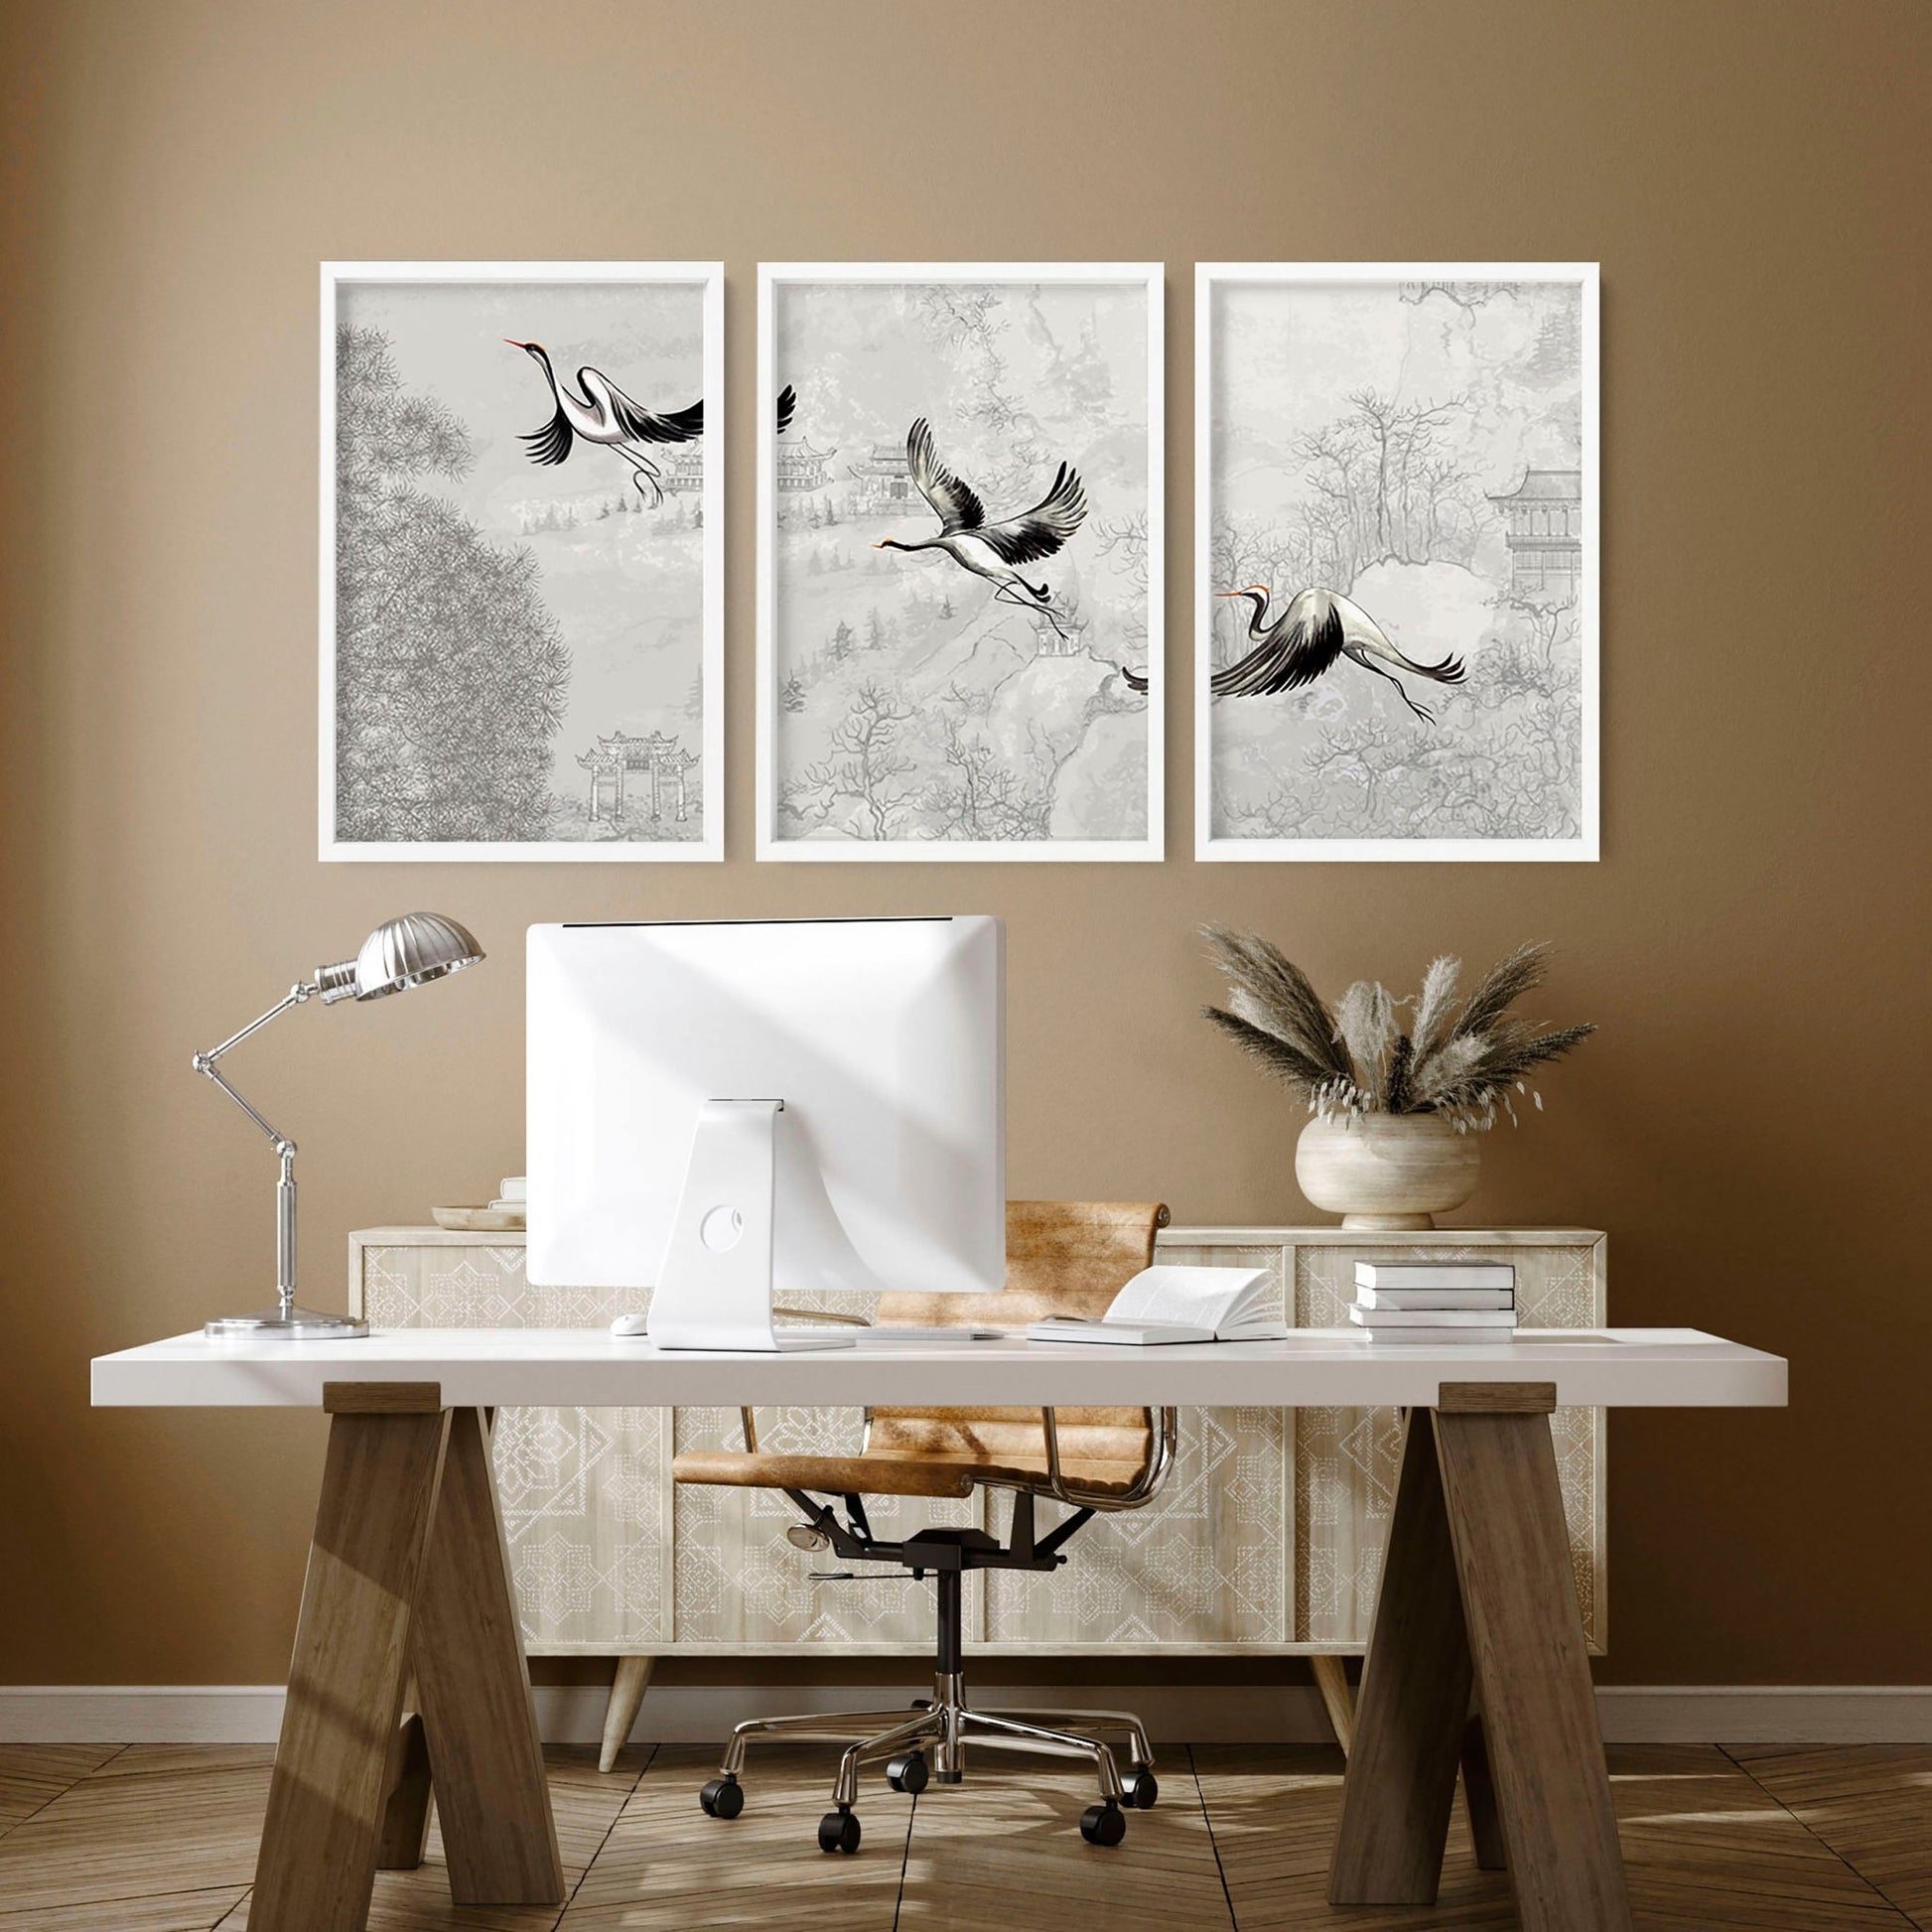 Pictures for office walls | set of 3 wall art prints - About Wall Art